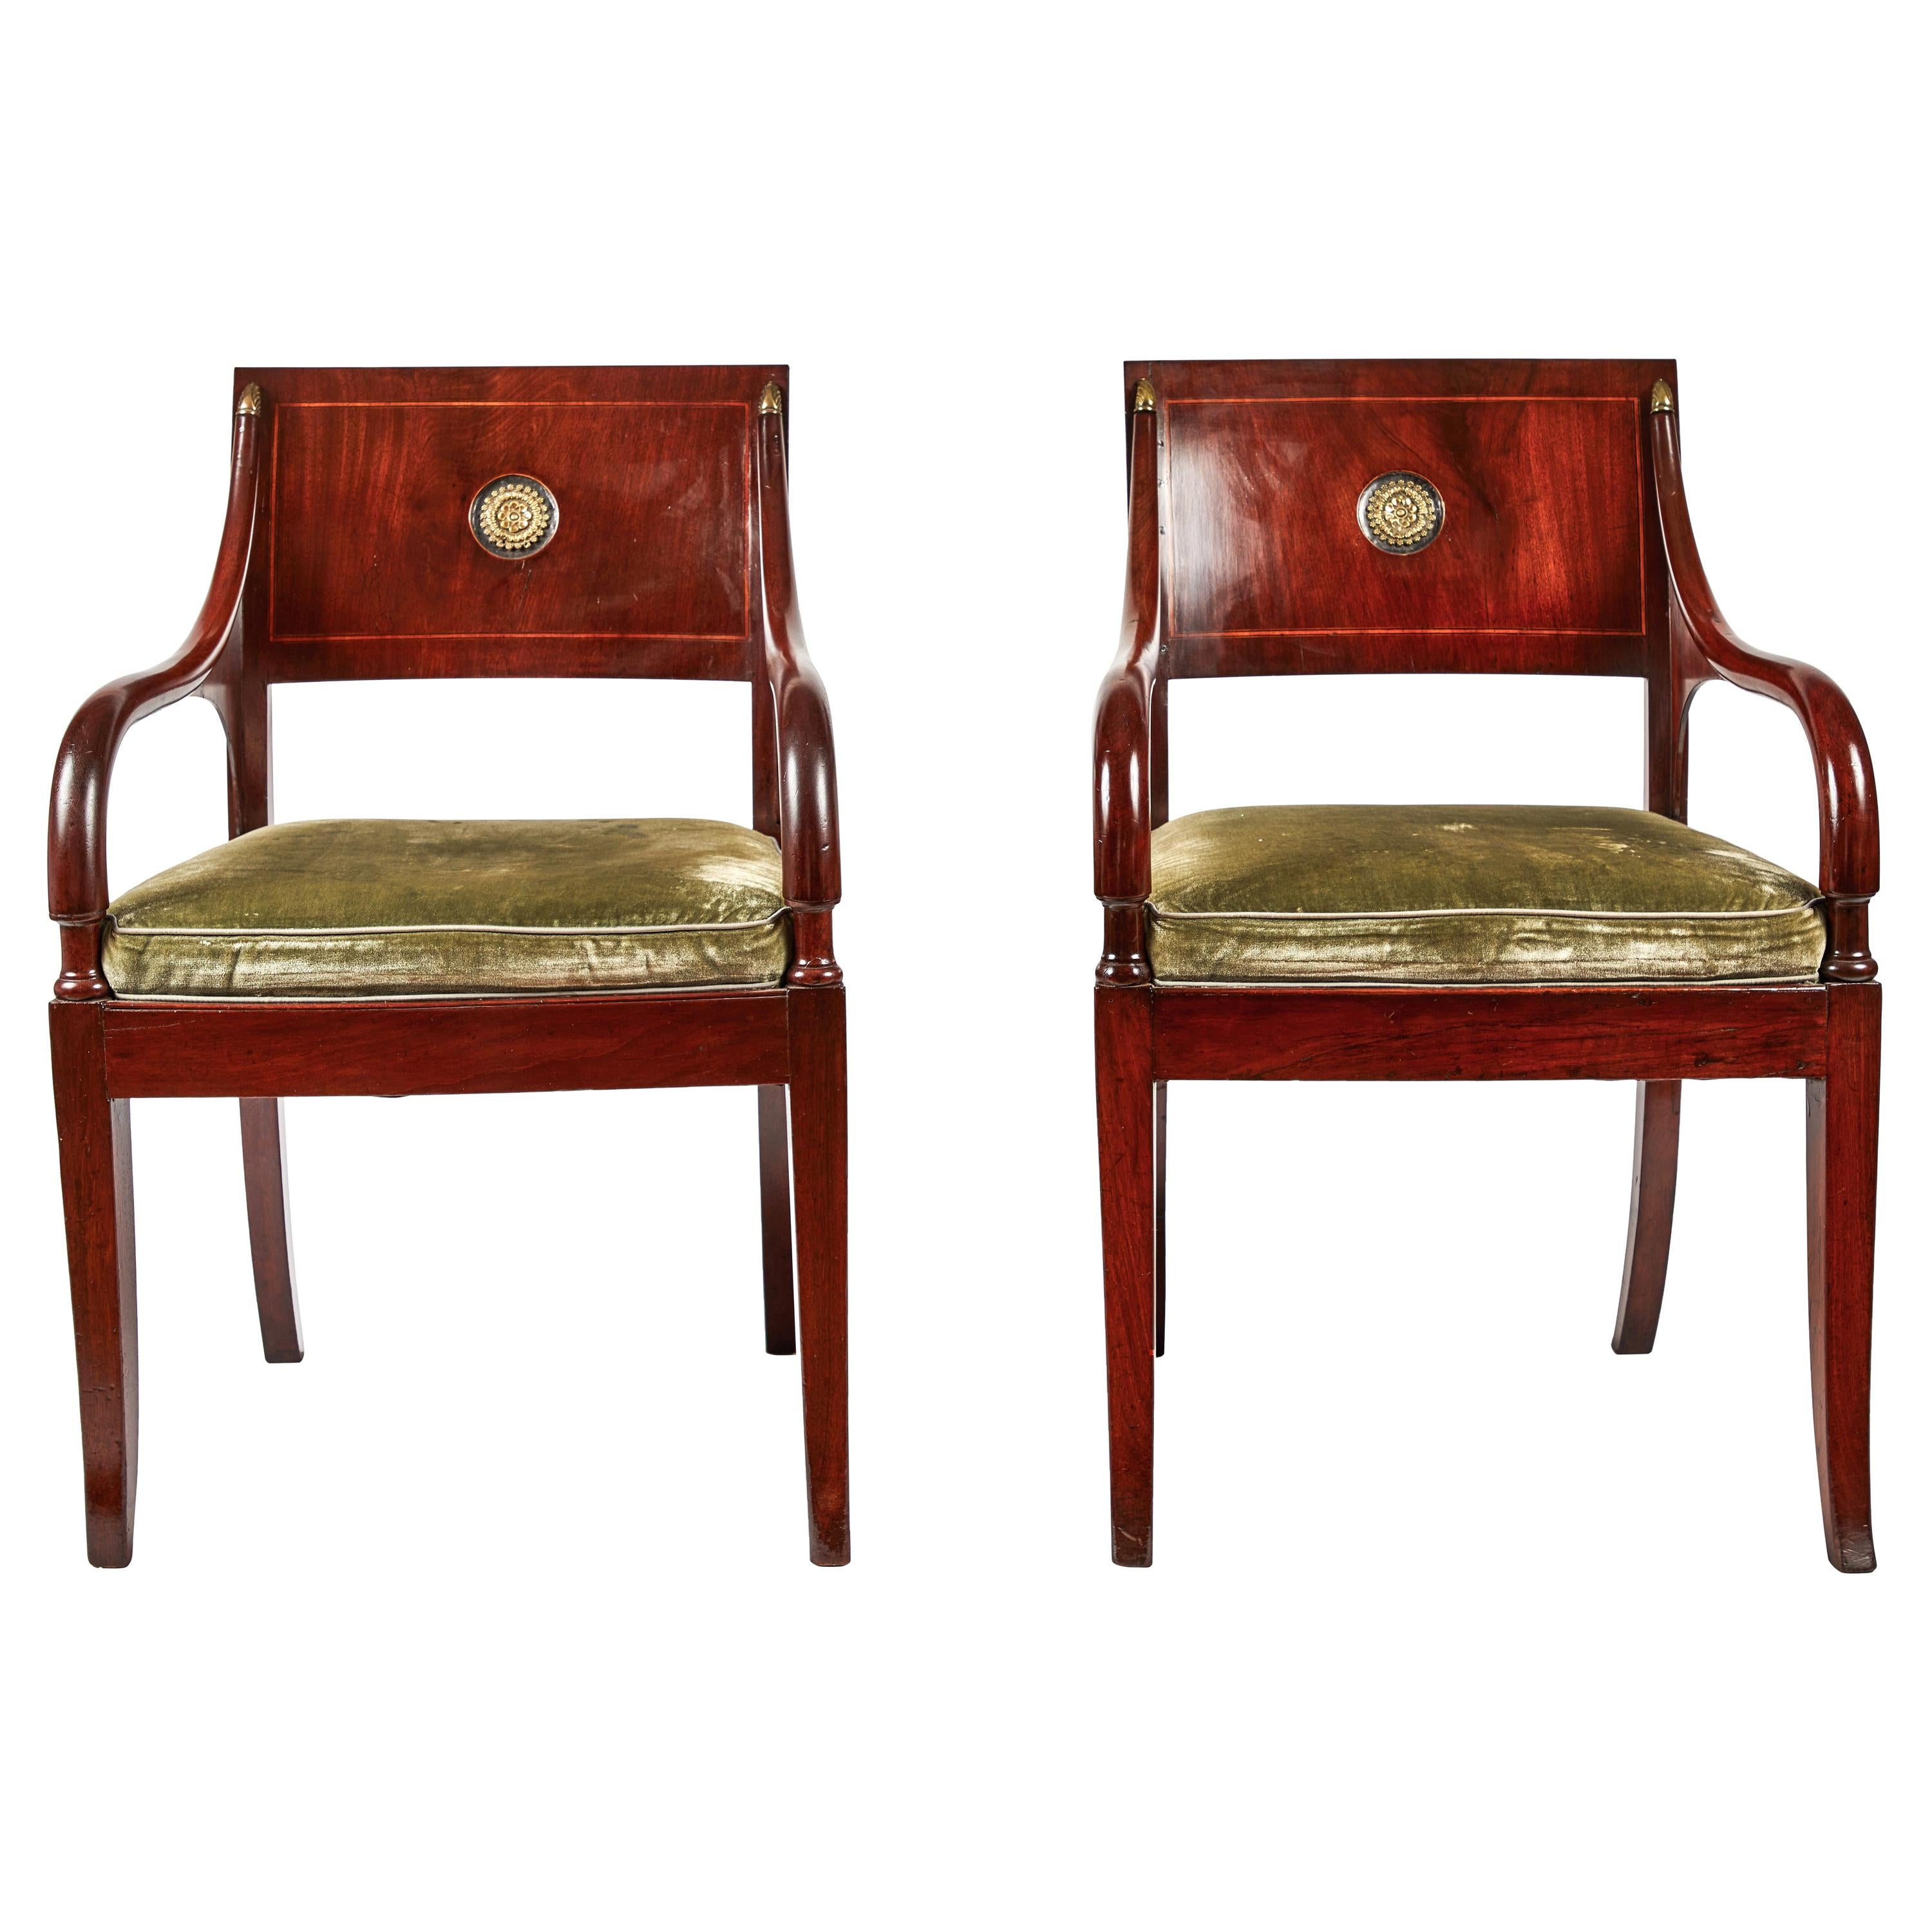 Pair of Antique Neoclassical Armchairs, Early 19th Century  For Sale